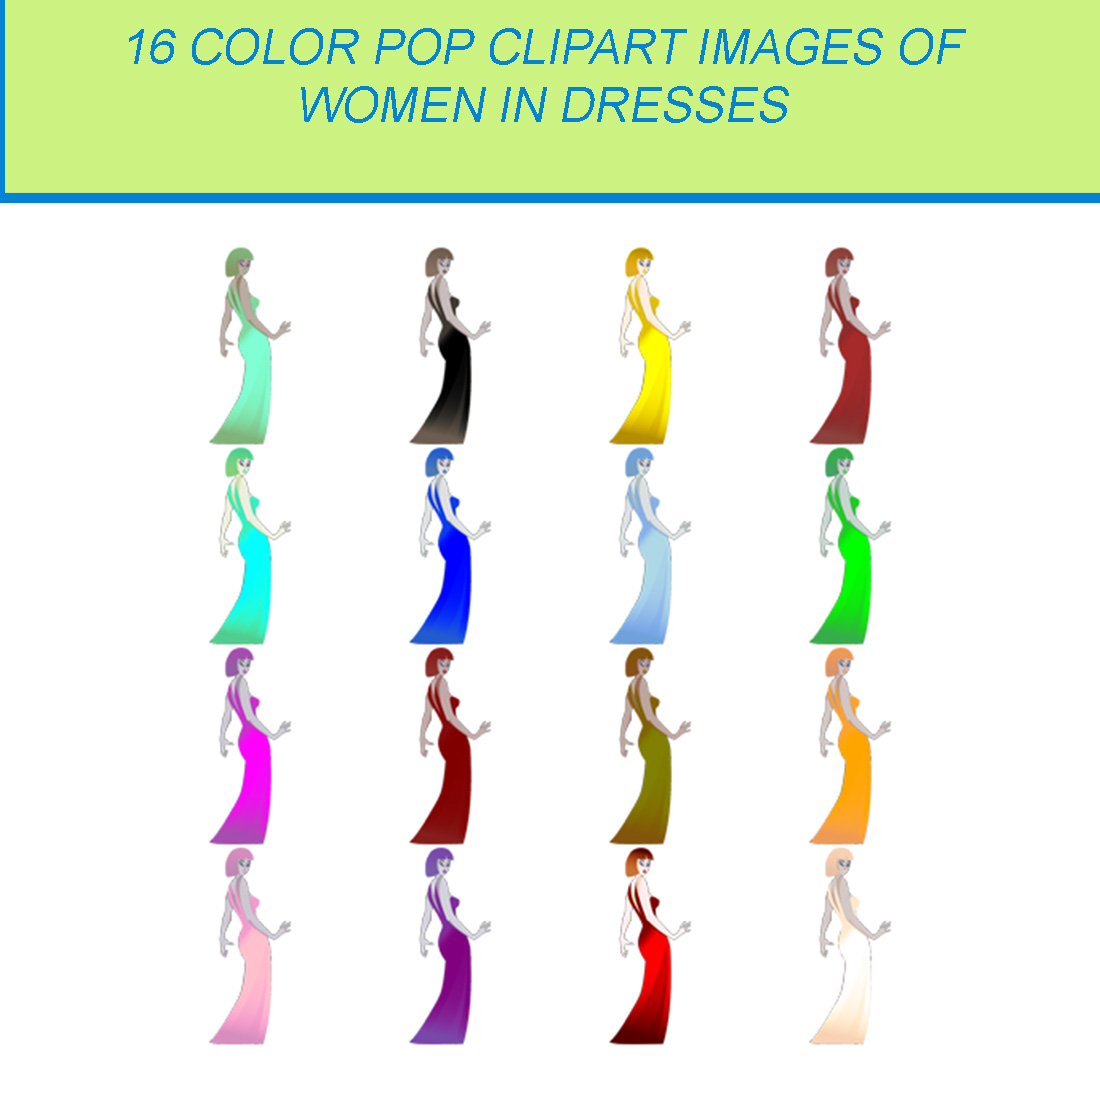 16 COLOR POP CLIPART IMAGES OF WOMAN IN DRESSES cover image.